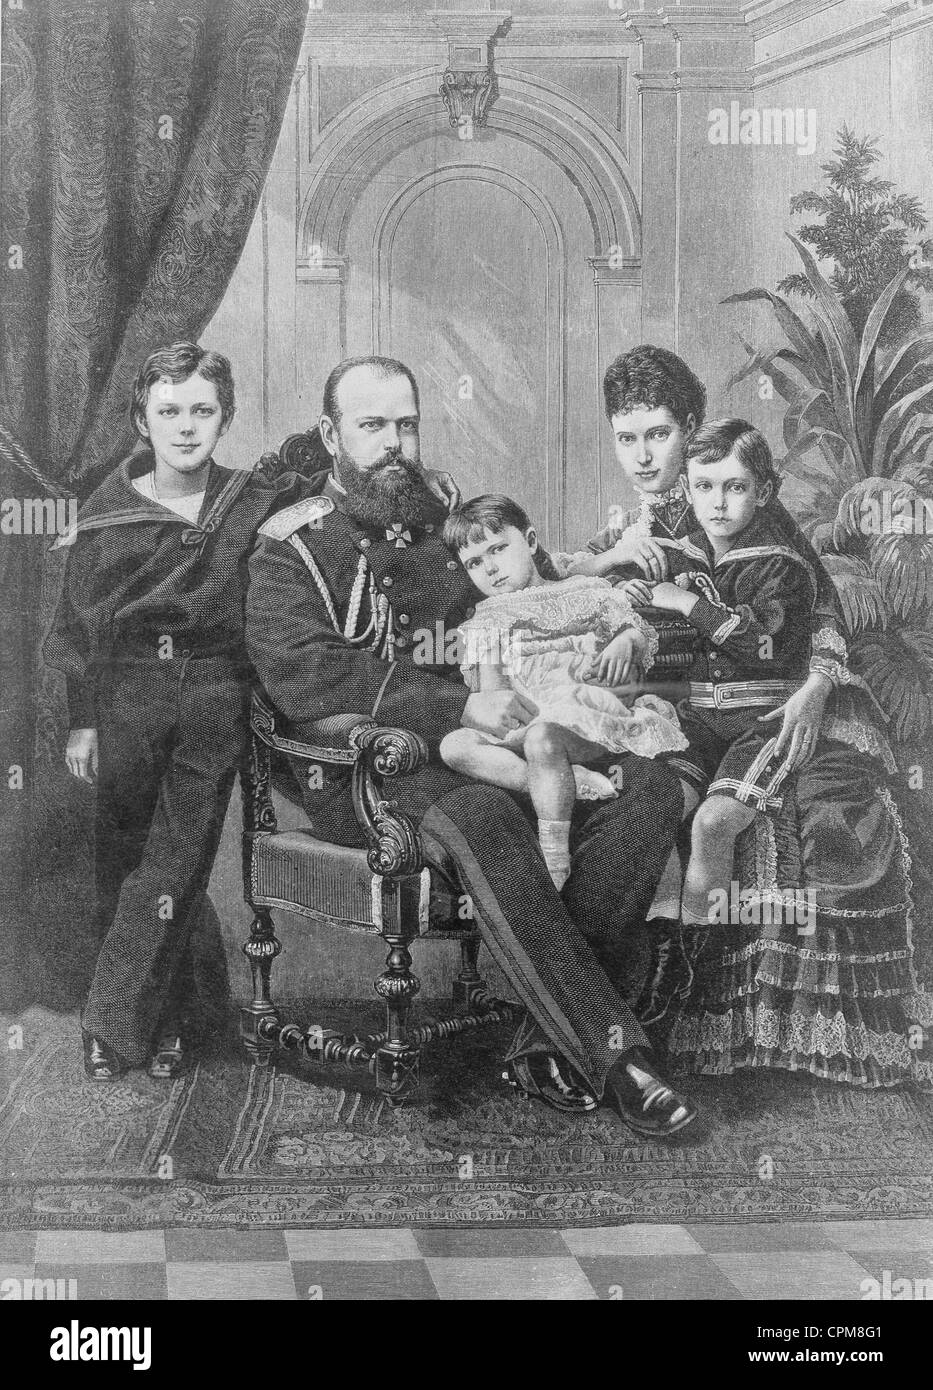 Tsar Alexander III. from Russia with his family, around 1880 Stock Photo